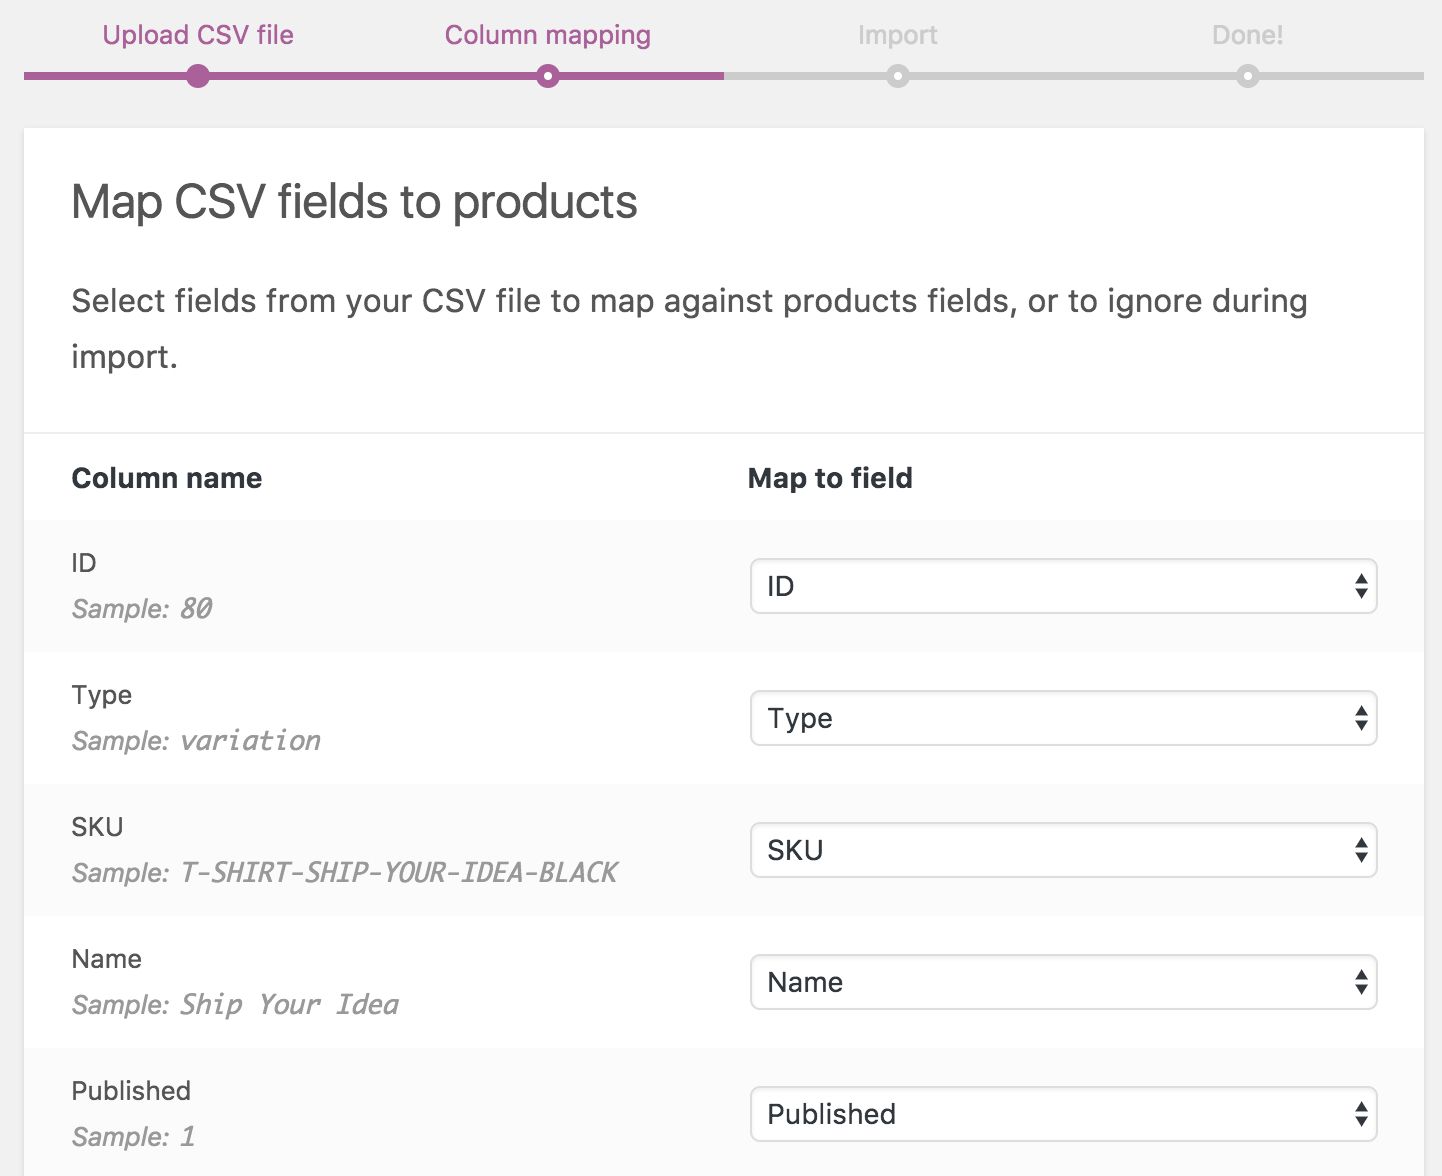 Correctly map the fields from your CSV to your products while setting up your ecommerce website